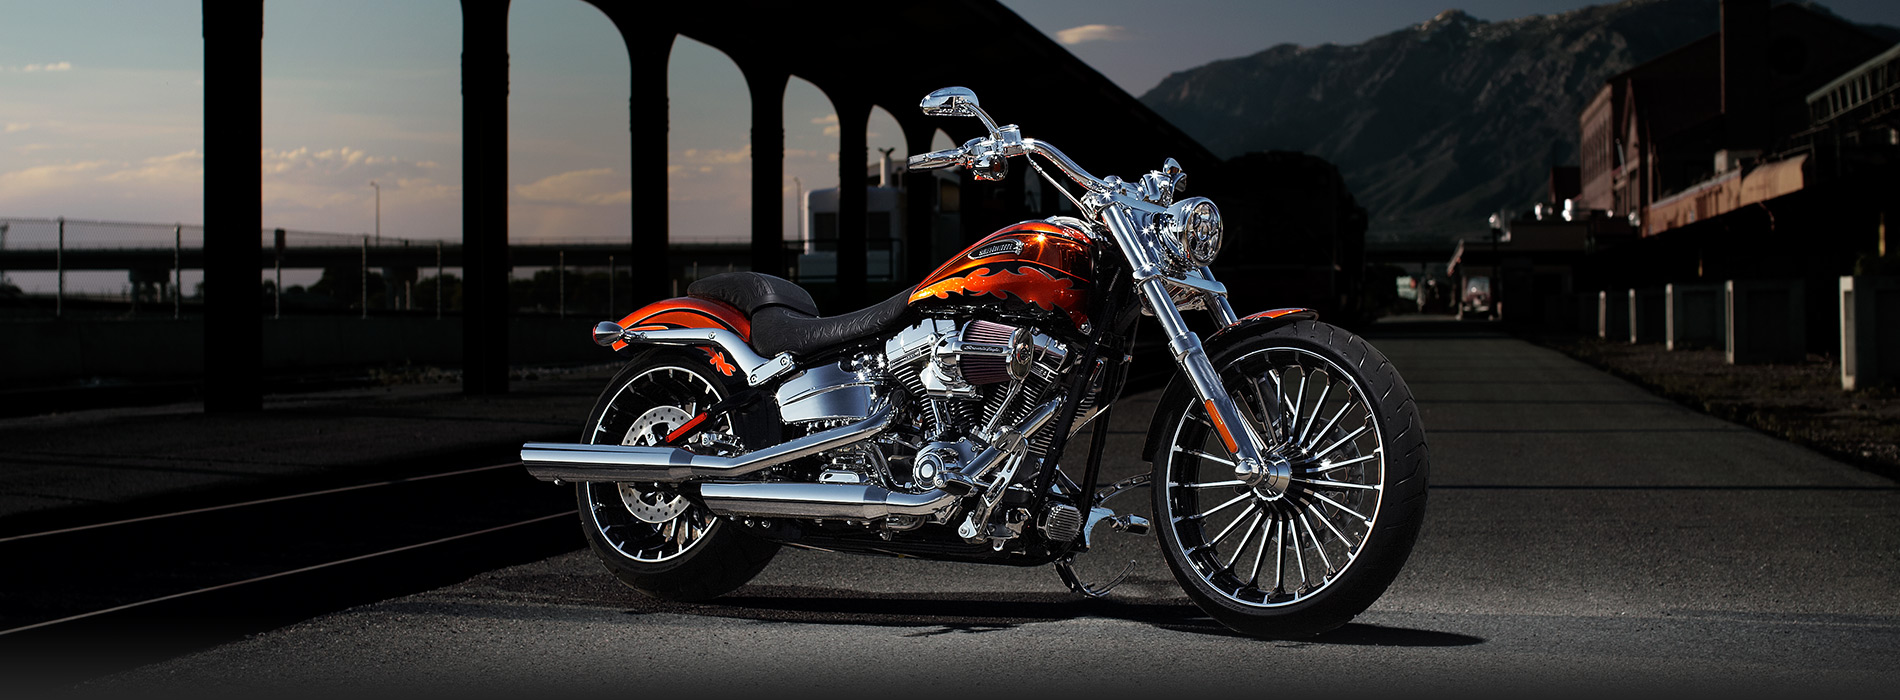 Harley Davidson Softail Breakout Special Edition Image 12